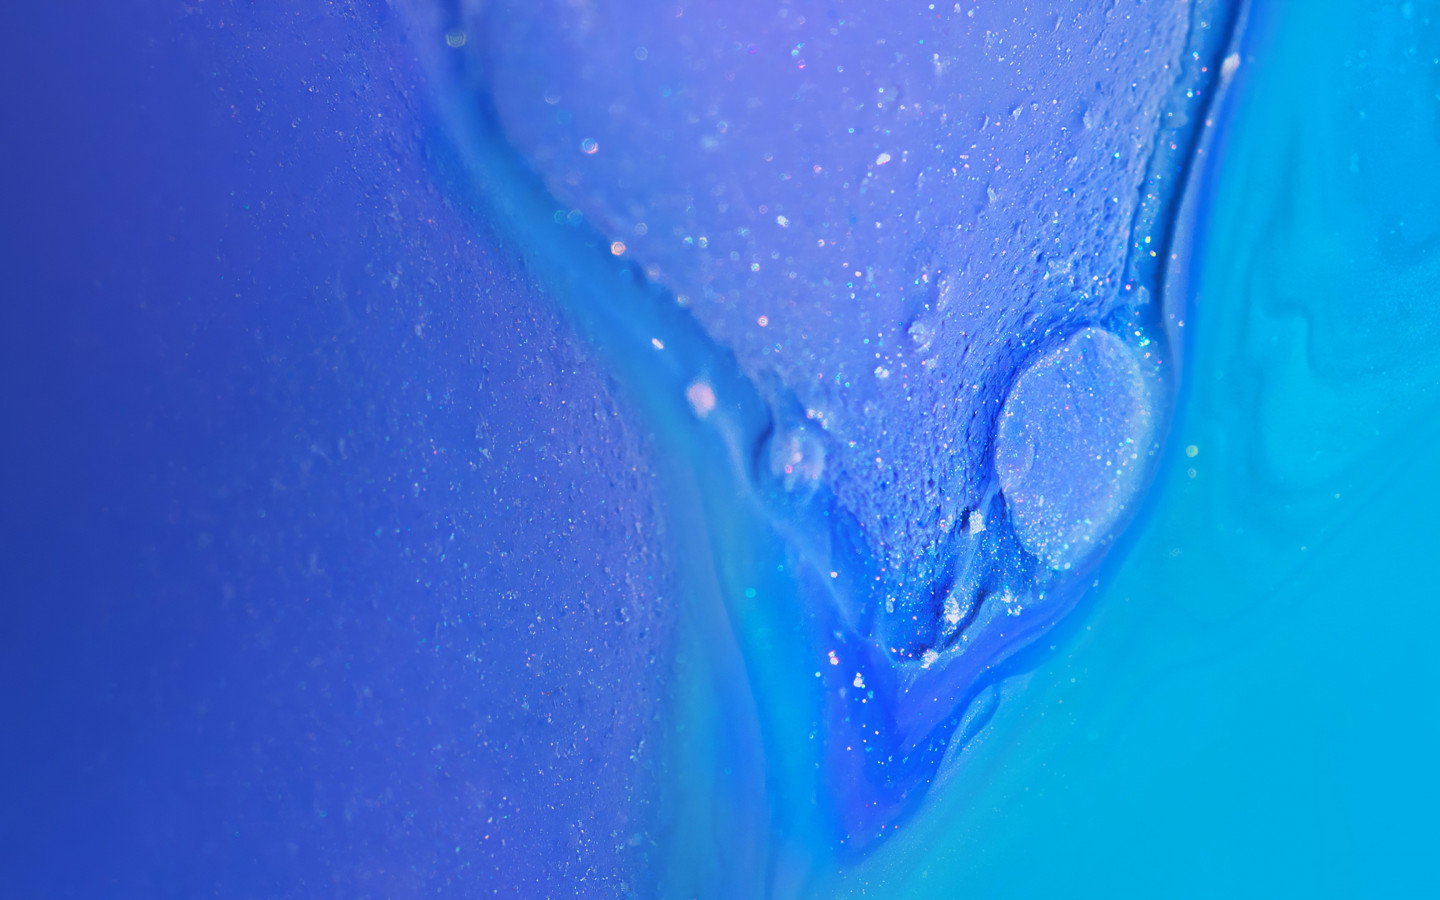 The blue abstract wallpaper 1440x900